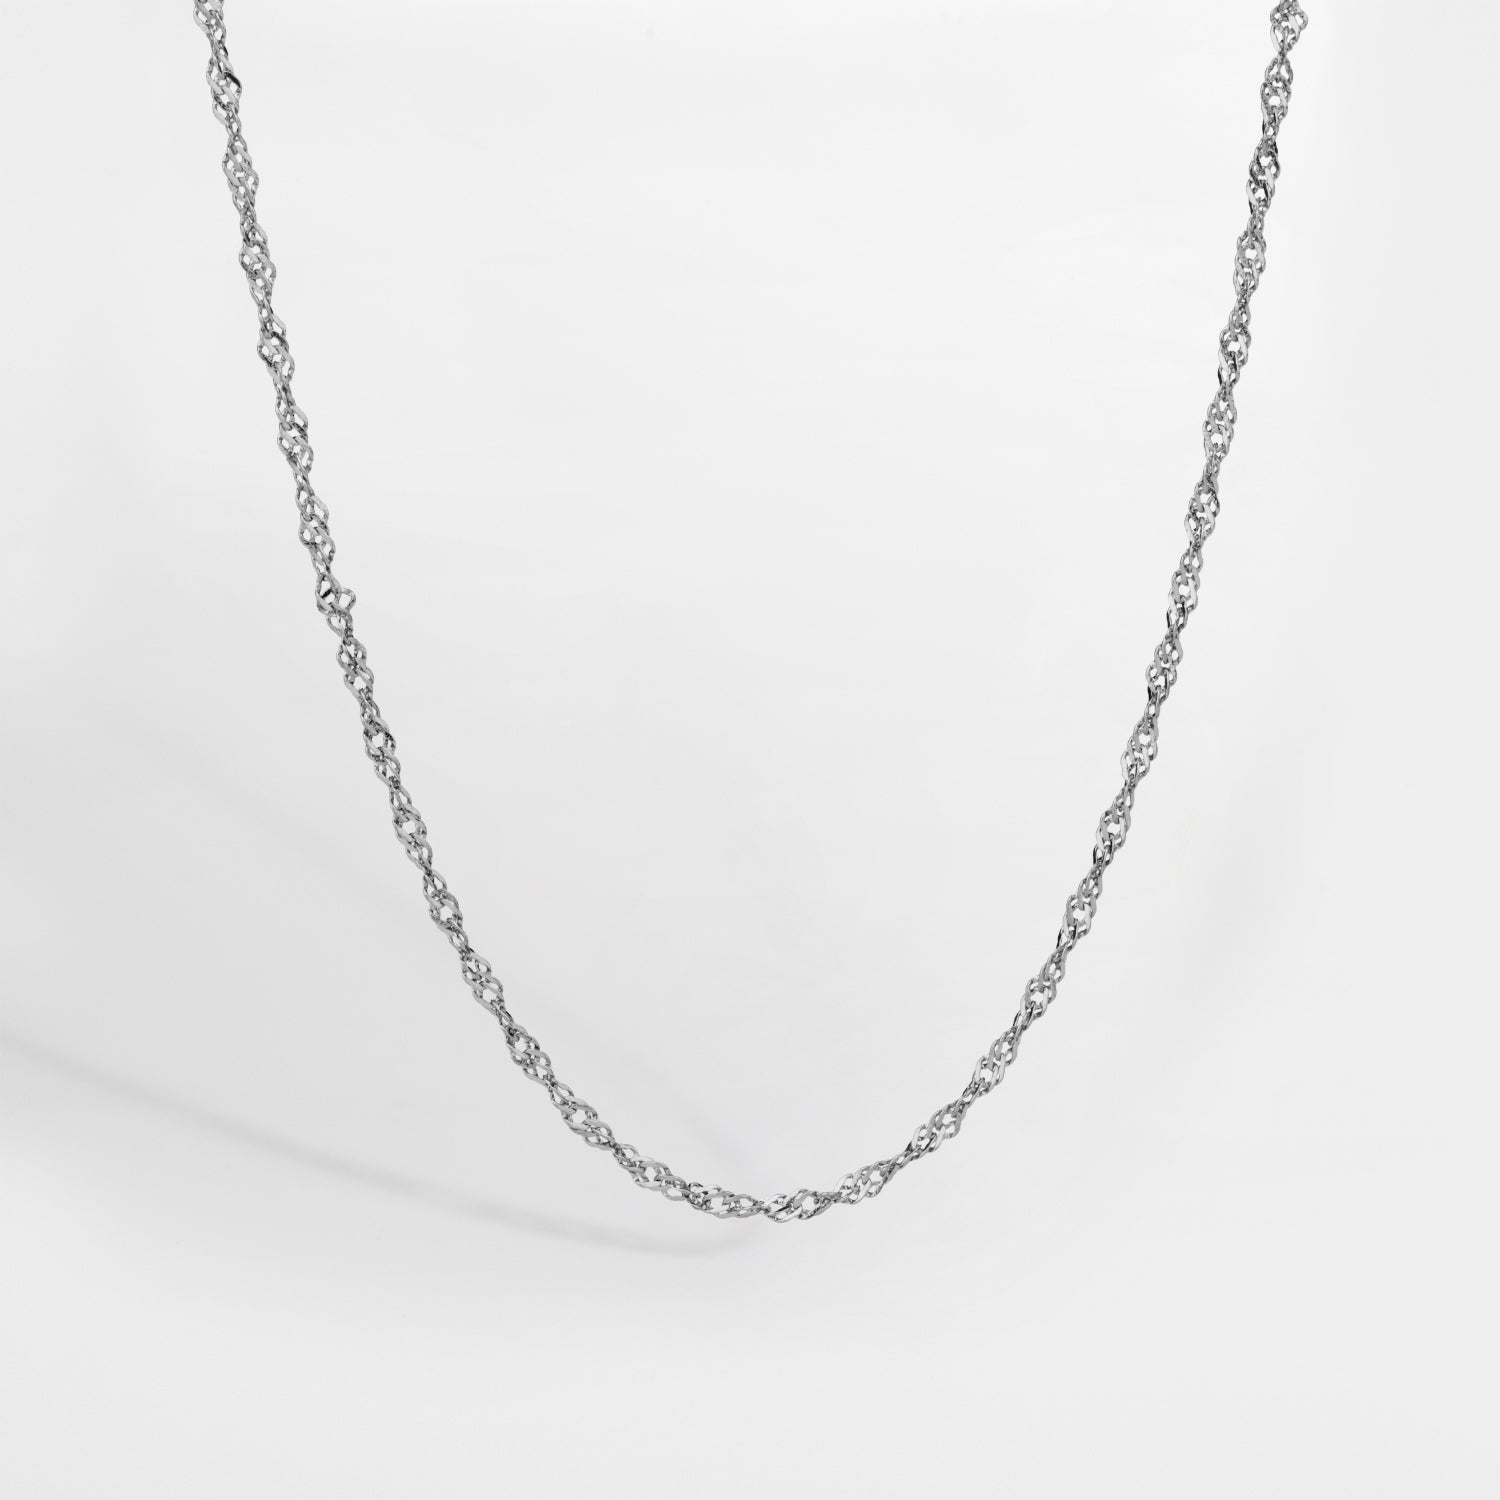 NL Vintage chain - Silver-toned